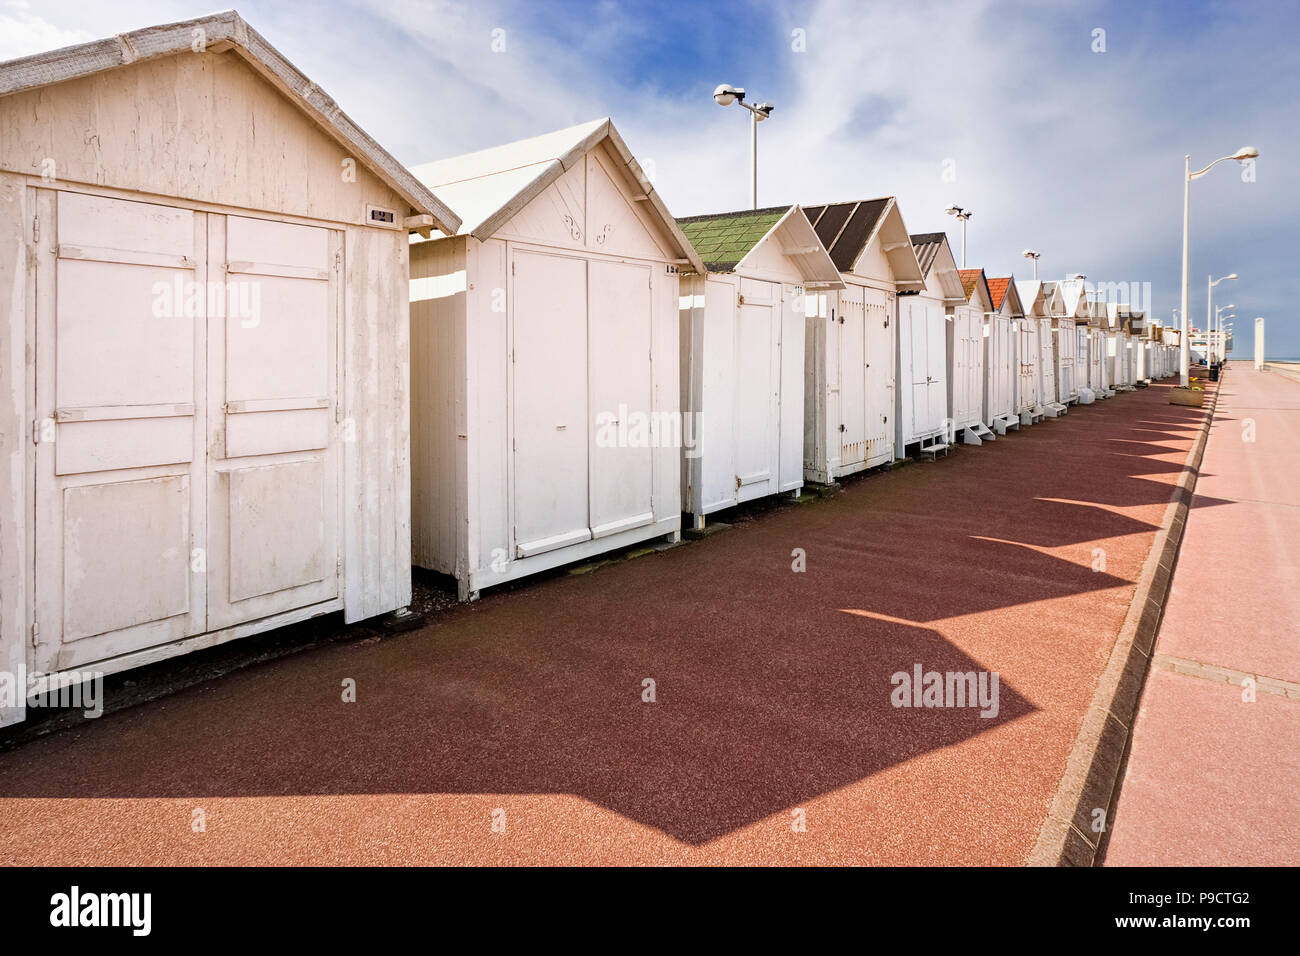 Bathing huts or beach huts on the promenade at Luc Sur Mer, Normandy, France, Europe Stock Photo